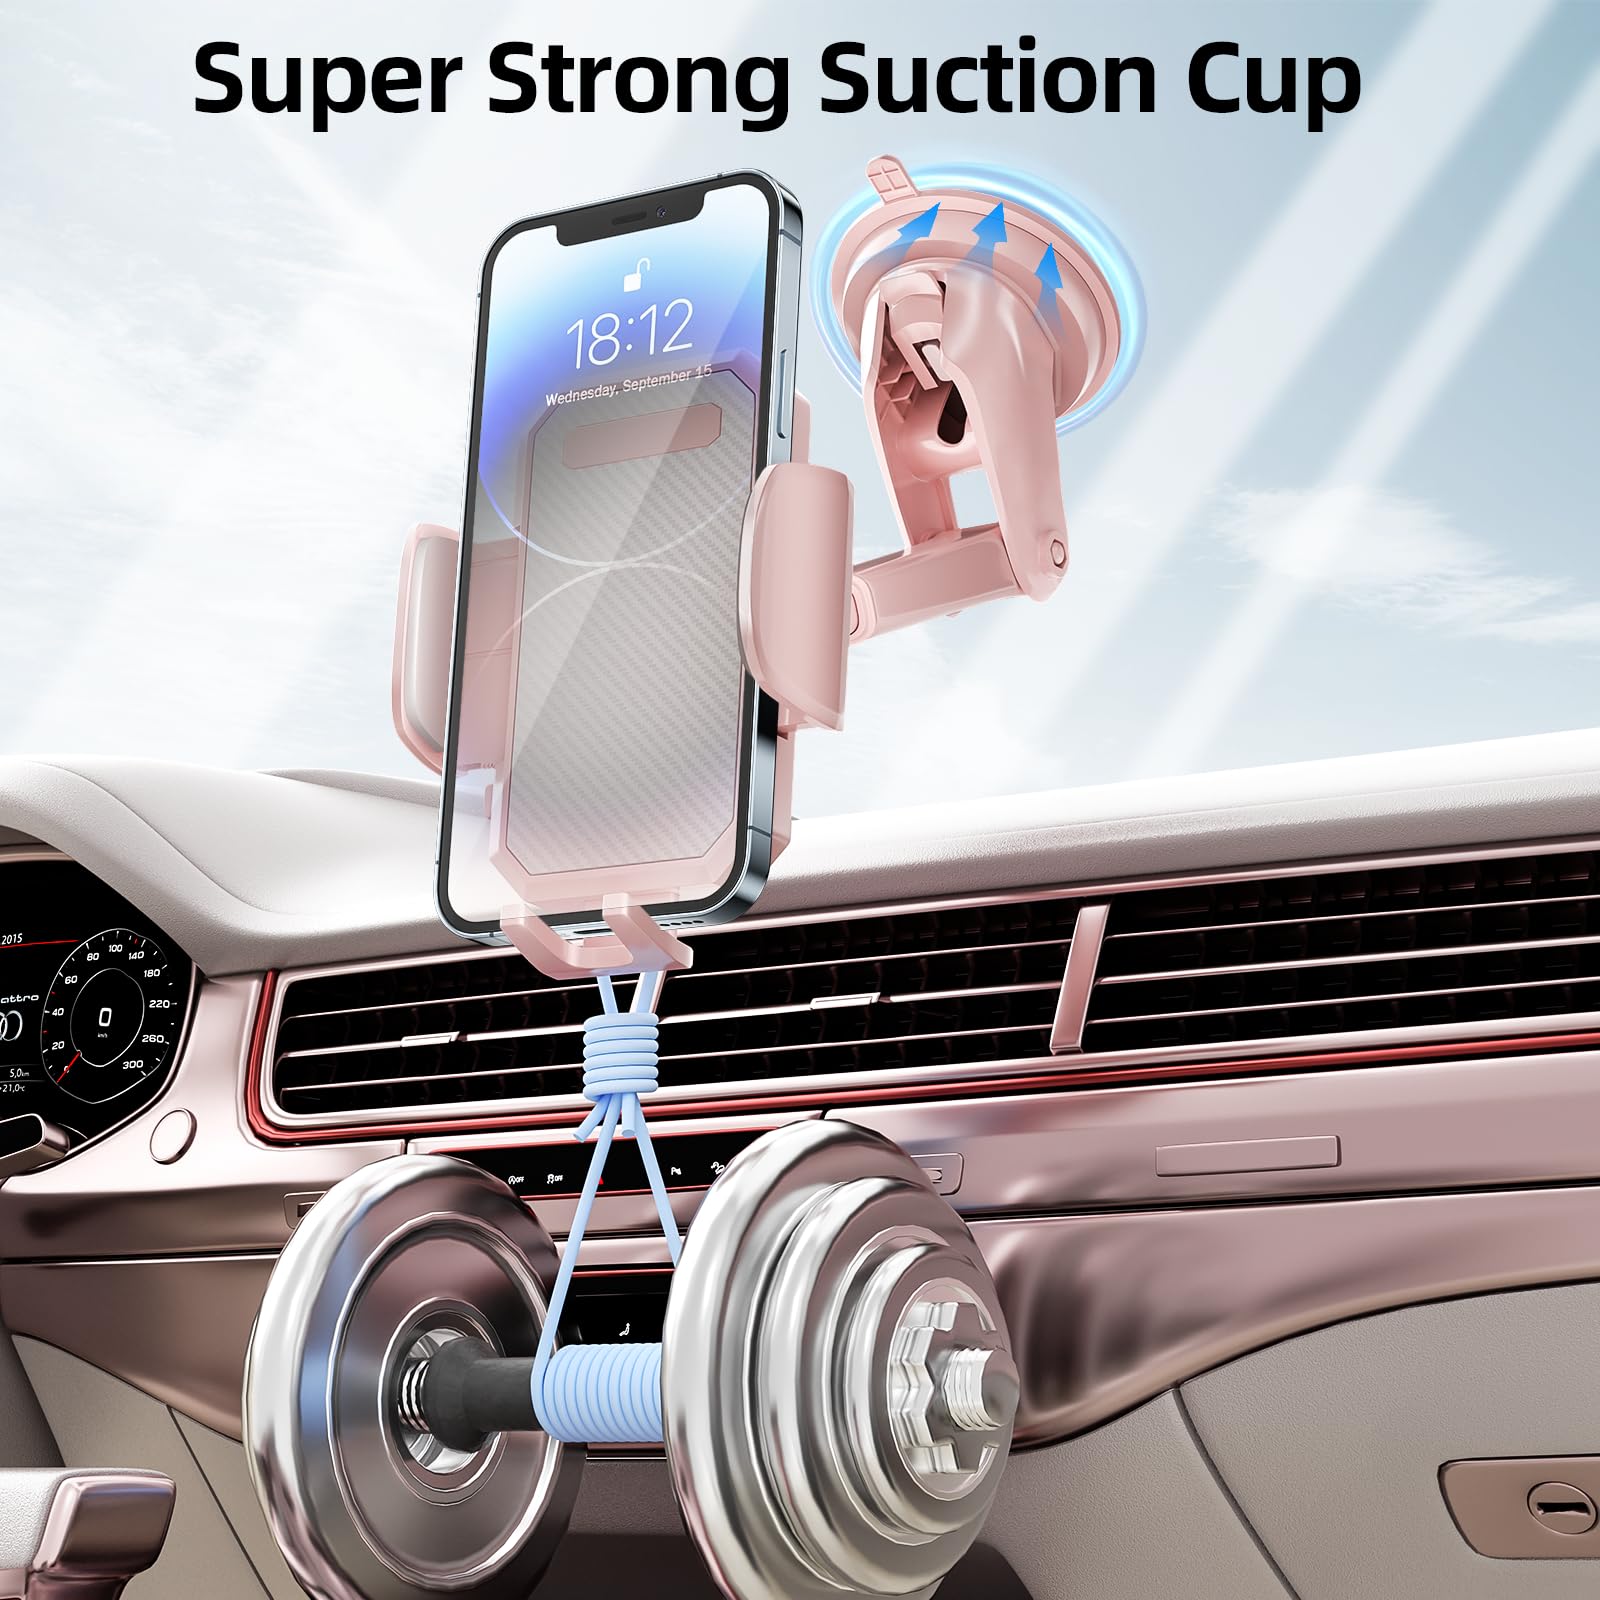 FBB 3-in-1 Phone Mount for car, Diamond Stickers Freely DIY, Sturdy & Secure Long Arm Suction Cup Holder Universal Car Dashboard Windshield Air Vent Car Phone Holder Compatible with All Smartphones